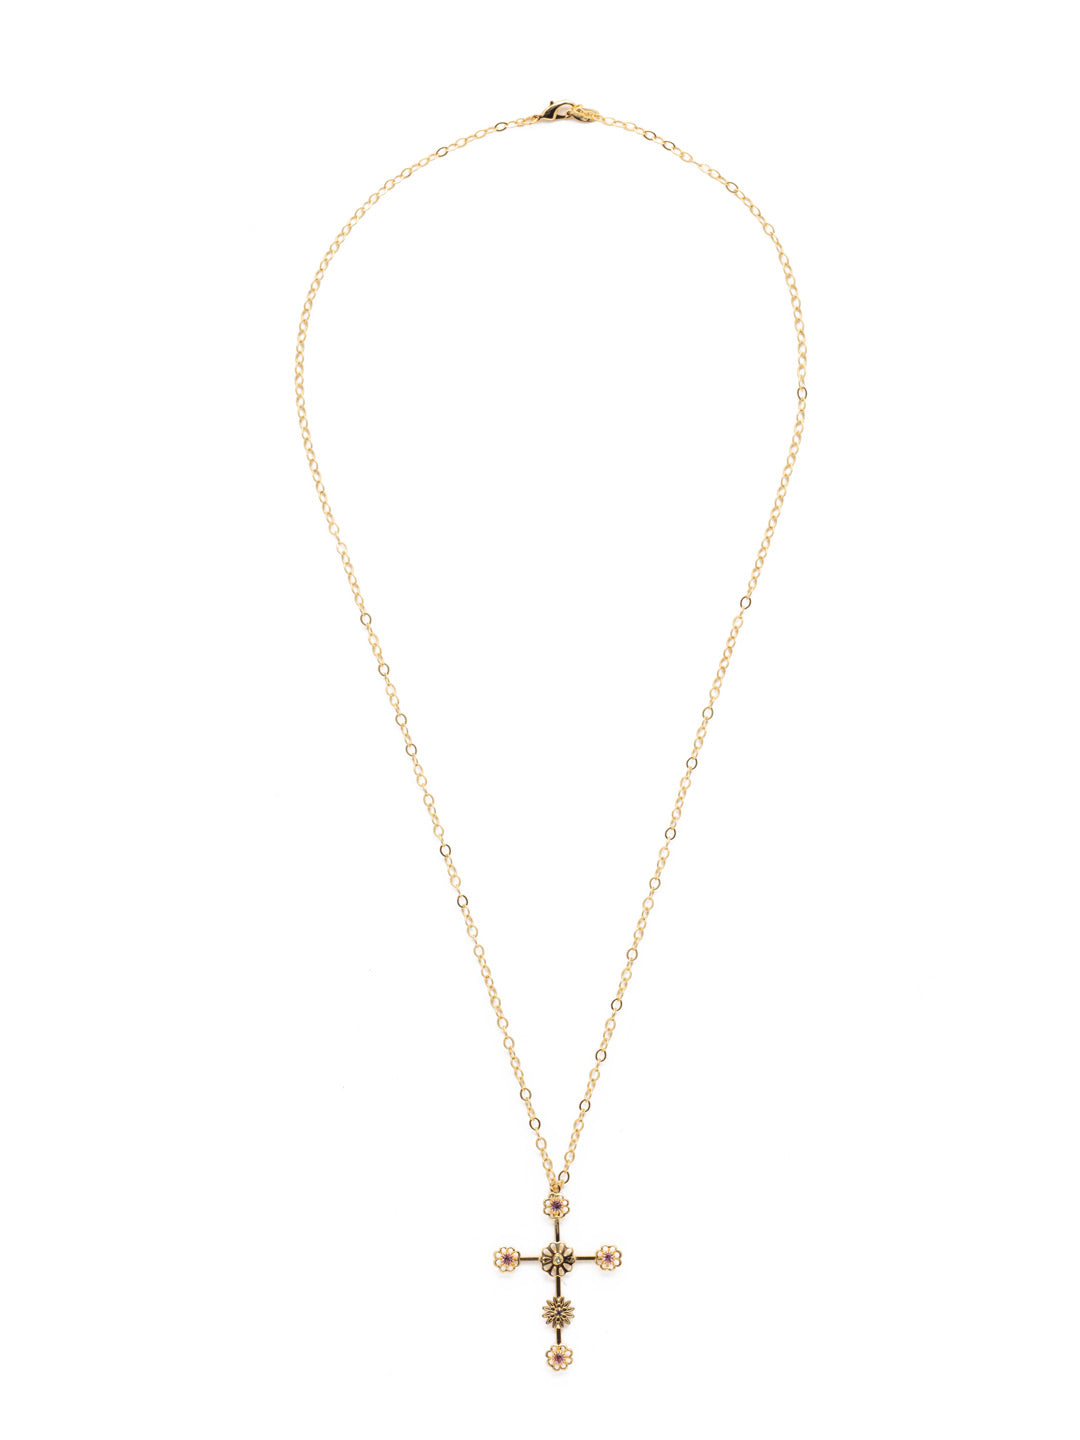 Logan Cross Pendant Necklace - NEX3BGSPR - Perfect for spring, the Logan Cross Pendant Necklace beautifully blends flowers and crystals on a cross pendant, hanging from an adjustable chain. From Sorrelli's Spring Rain collection in our Bright Gold-tone finish.